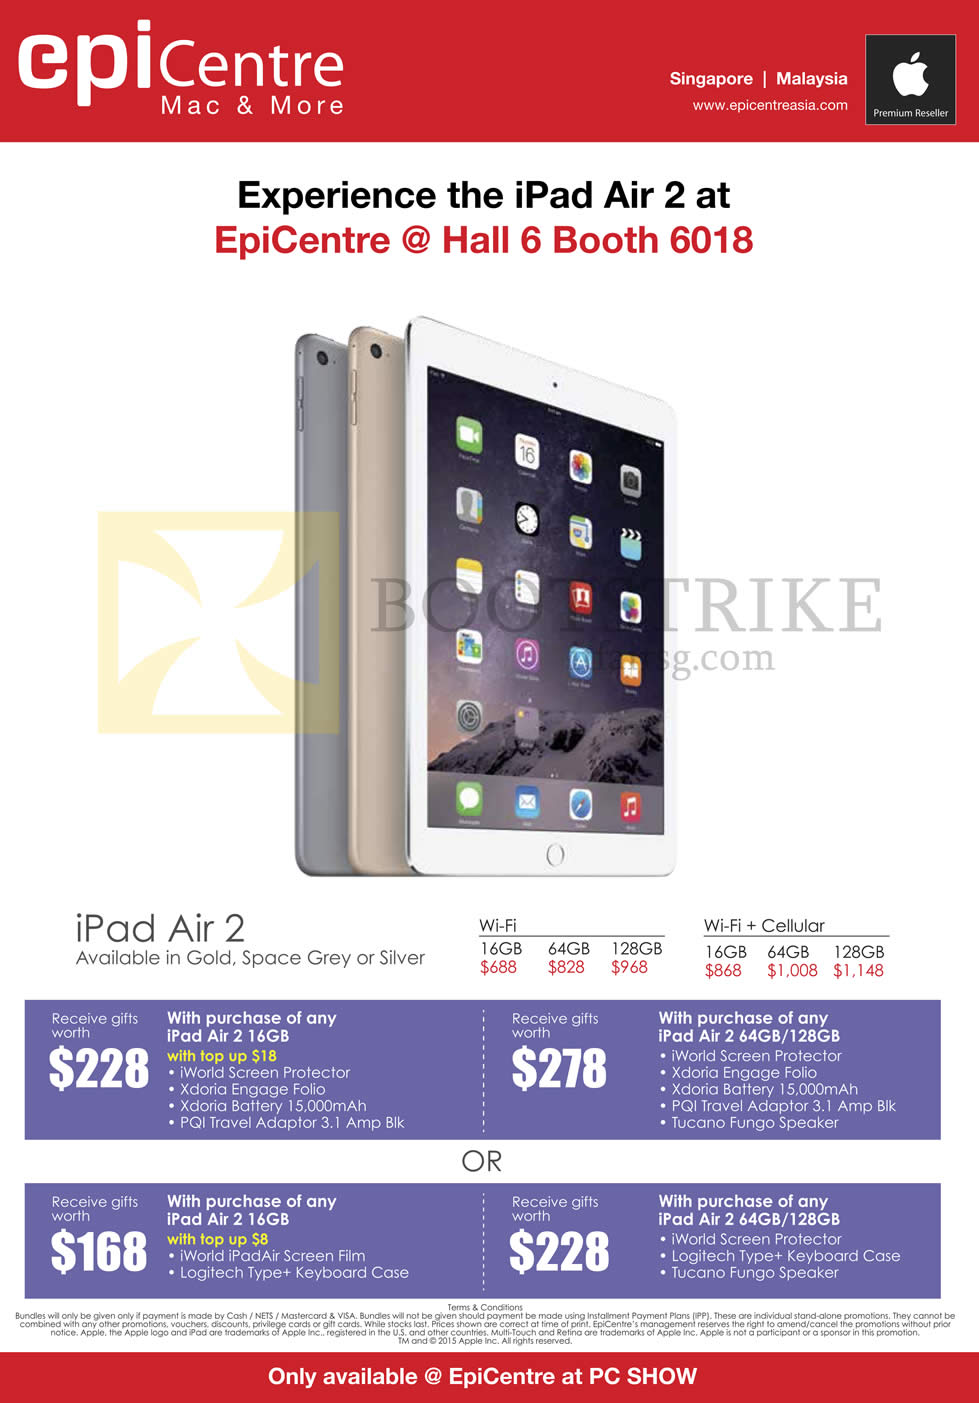 PC SHOW 2015 price list image brochure of EpiCentre Apple IPad Air 2